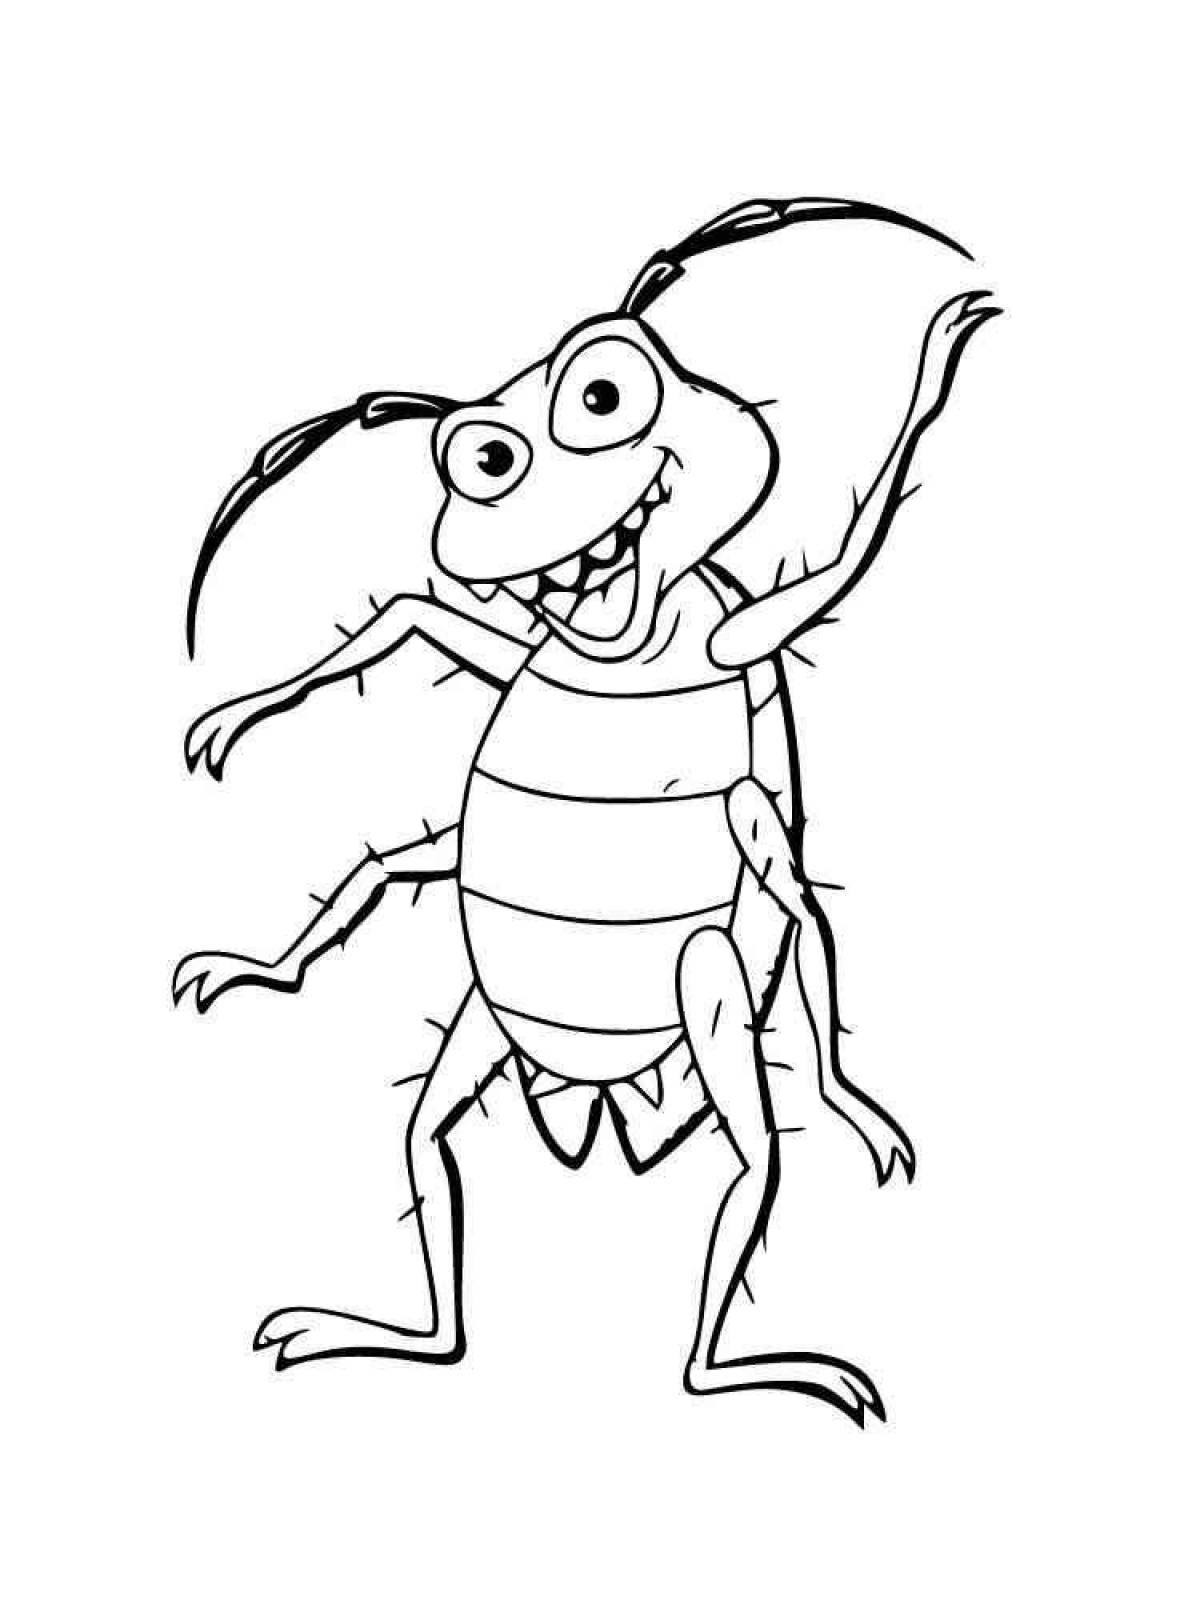 Coloring book cheerful cockroach Chukovsky